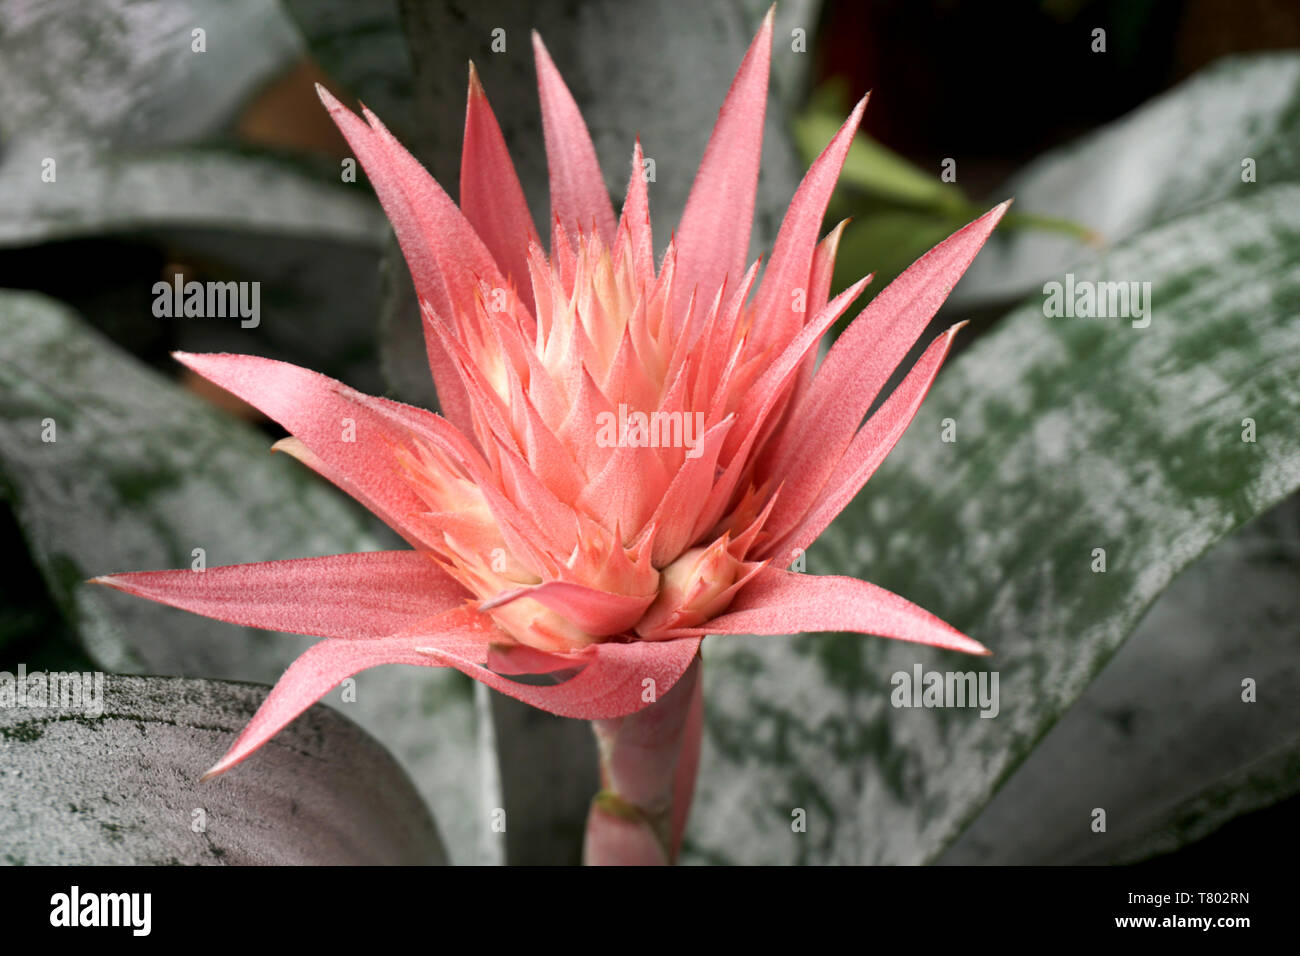 Close up view of pink flower of Aechmea fasciata from botany family Bromeliaceae. Vivid color sharply flower Nature detail Stock Photo